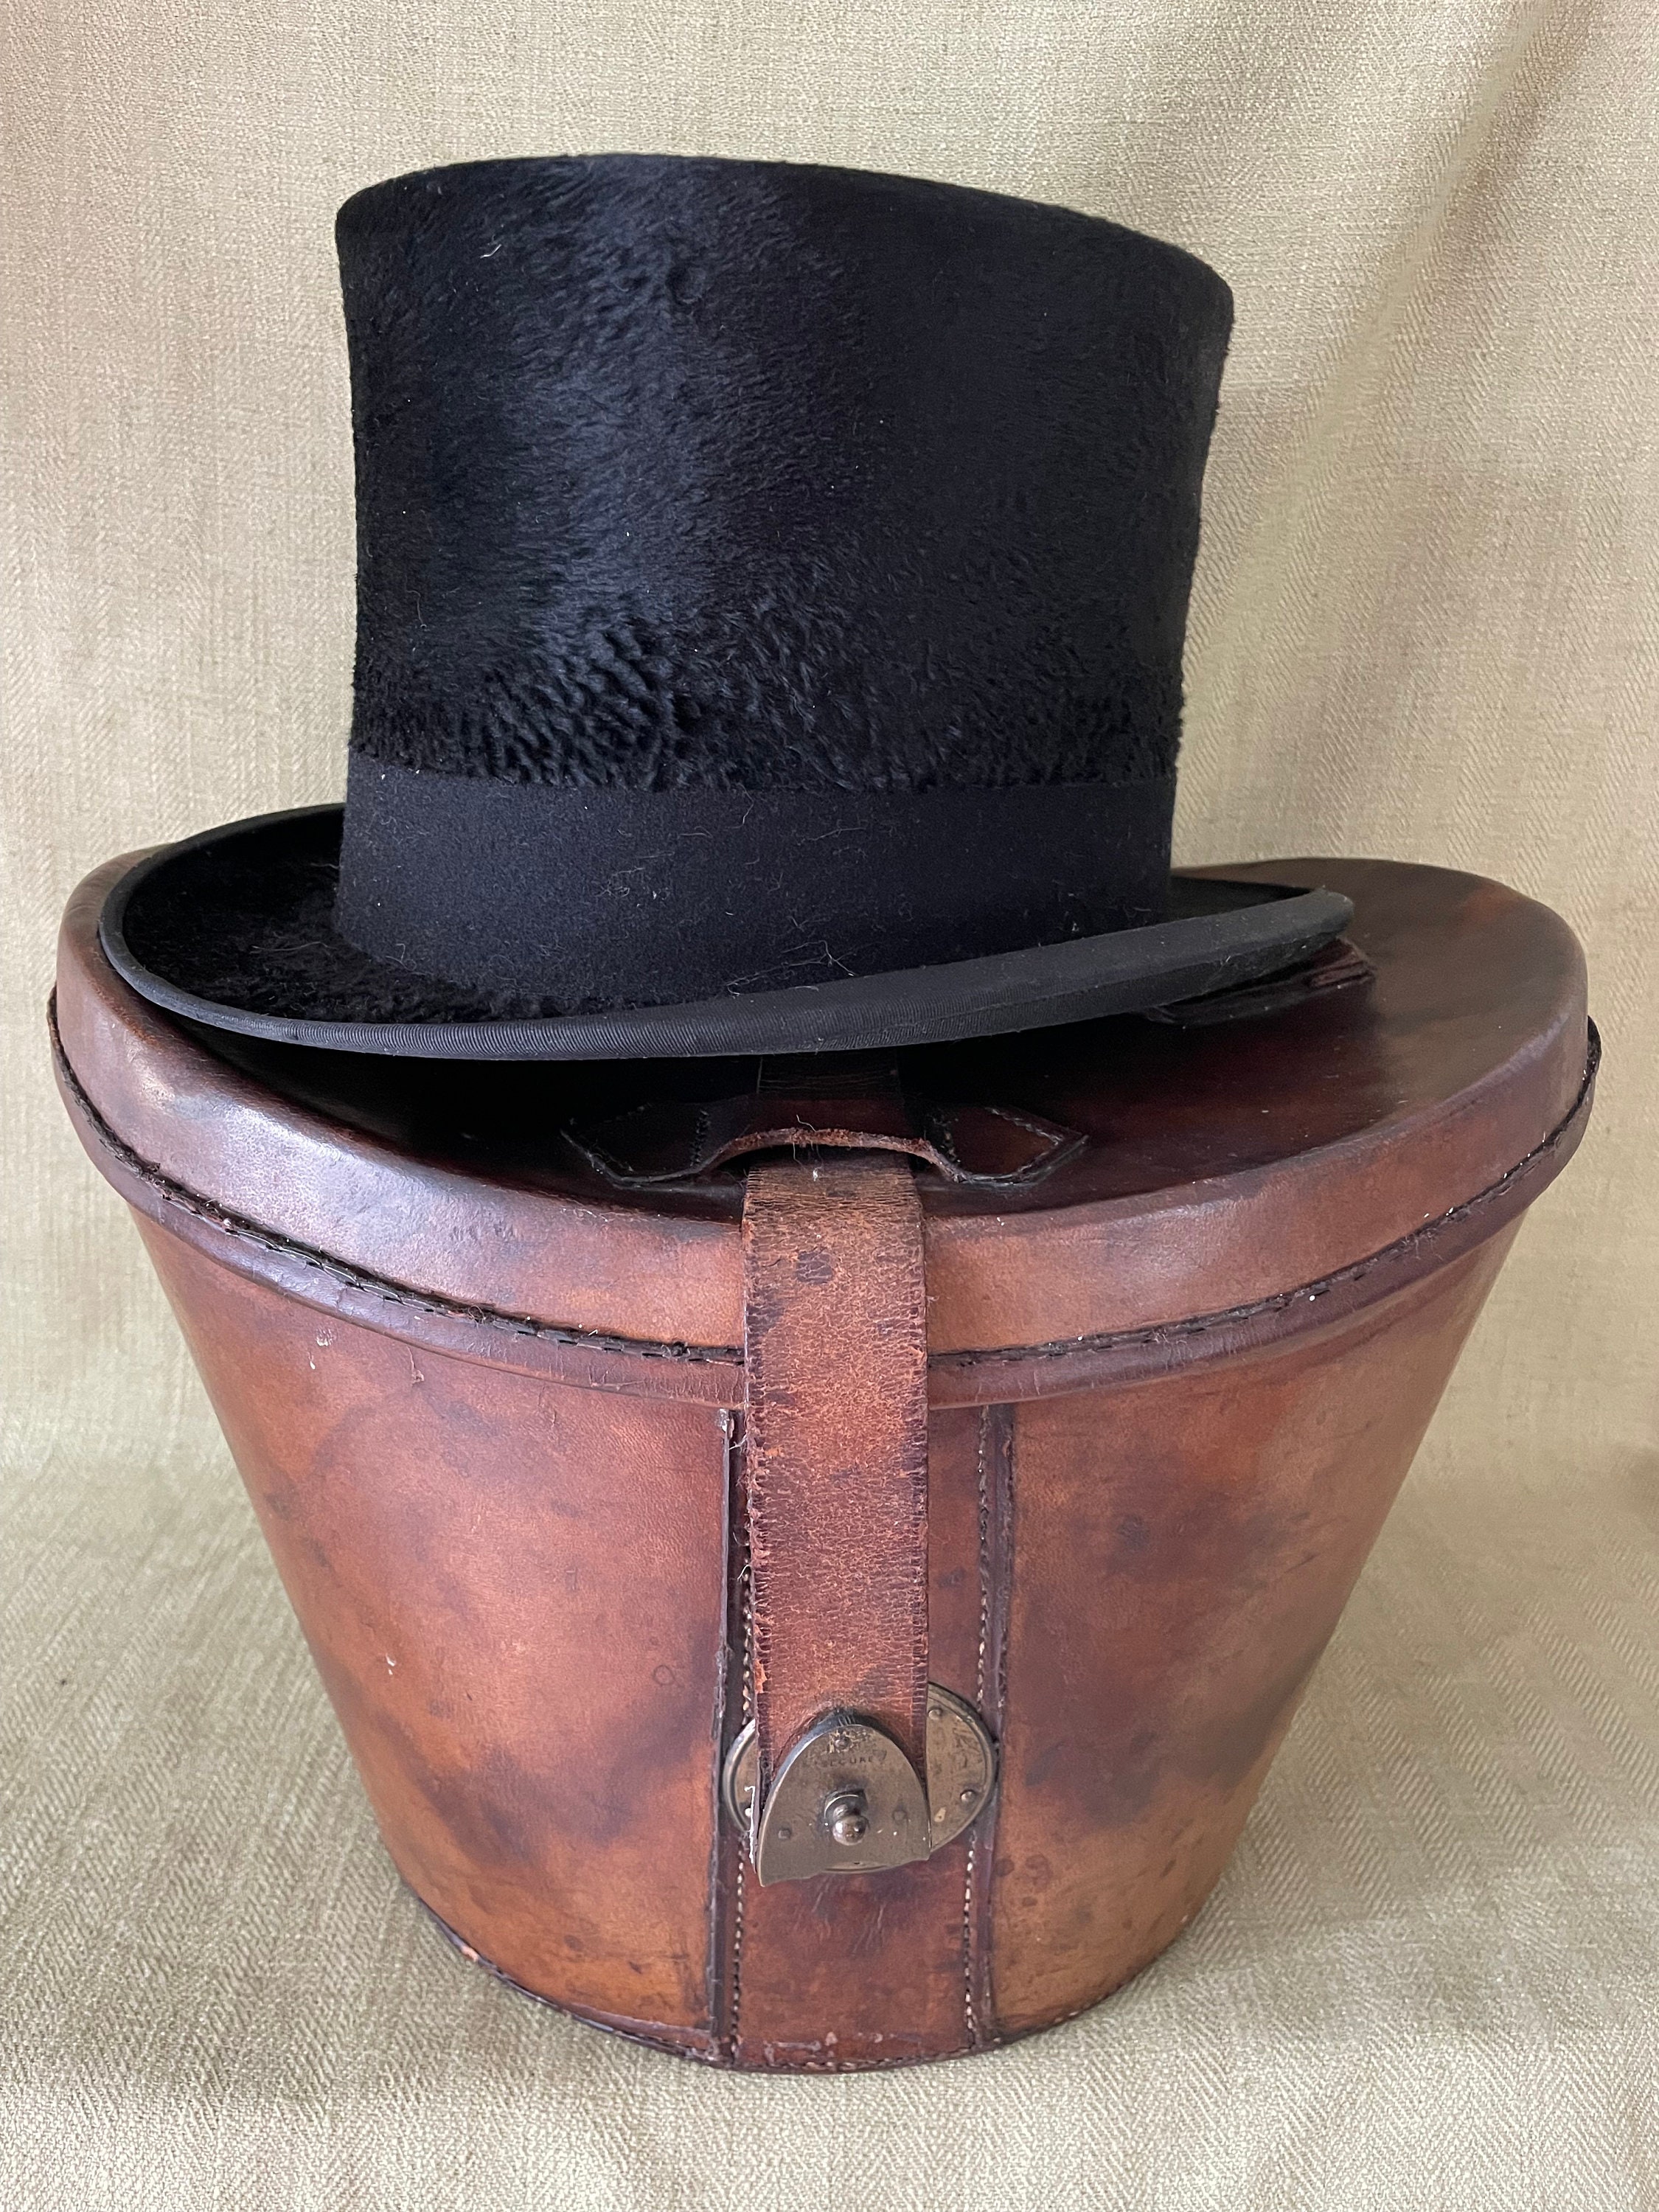 Vintage 1920s Top Hat Leather Travel Case Scotts London Luggage